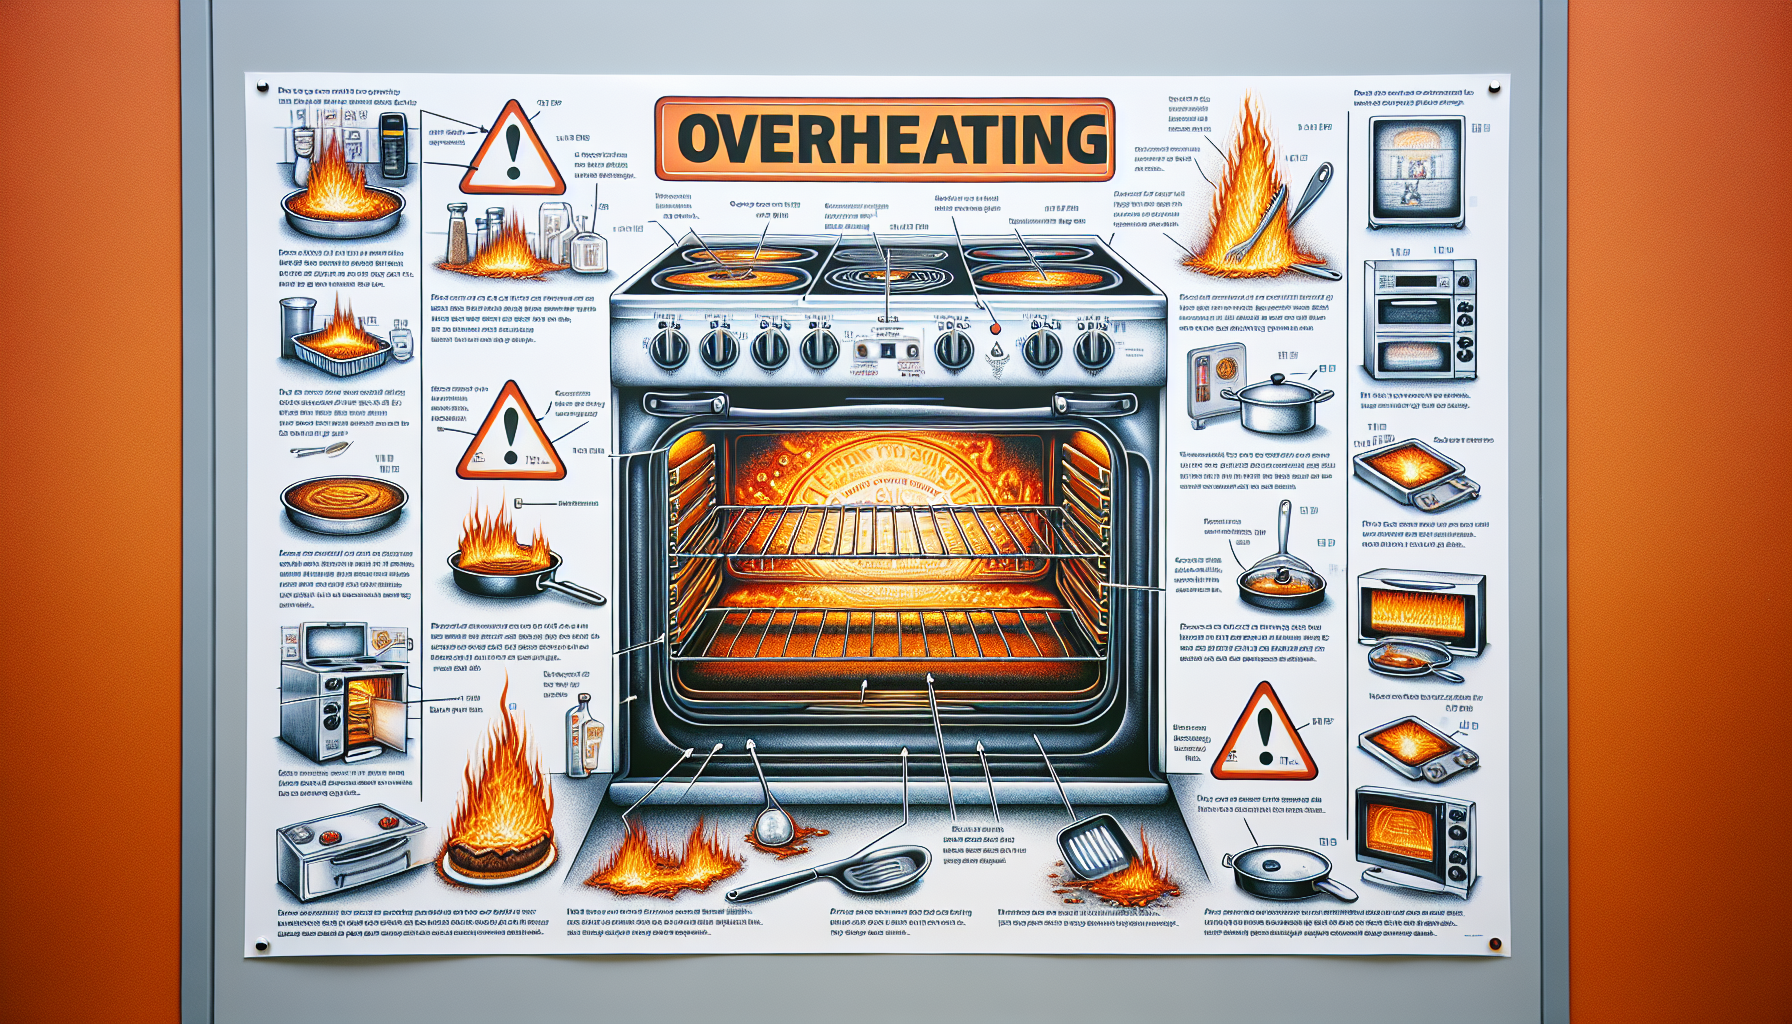 All you need to know to stop your oven from overheating